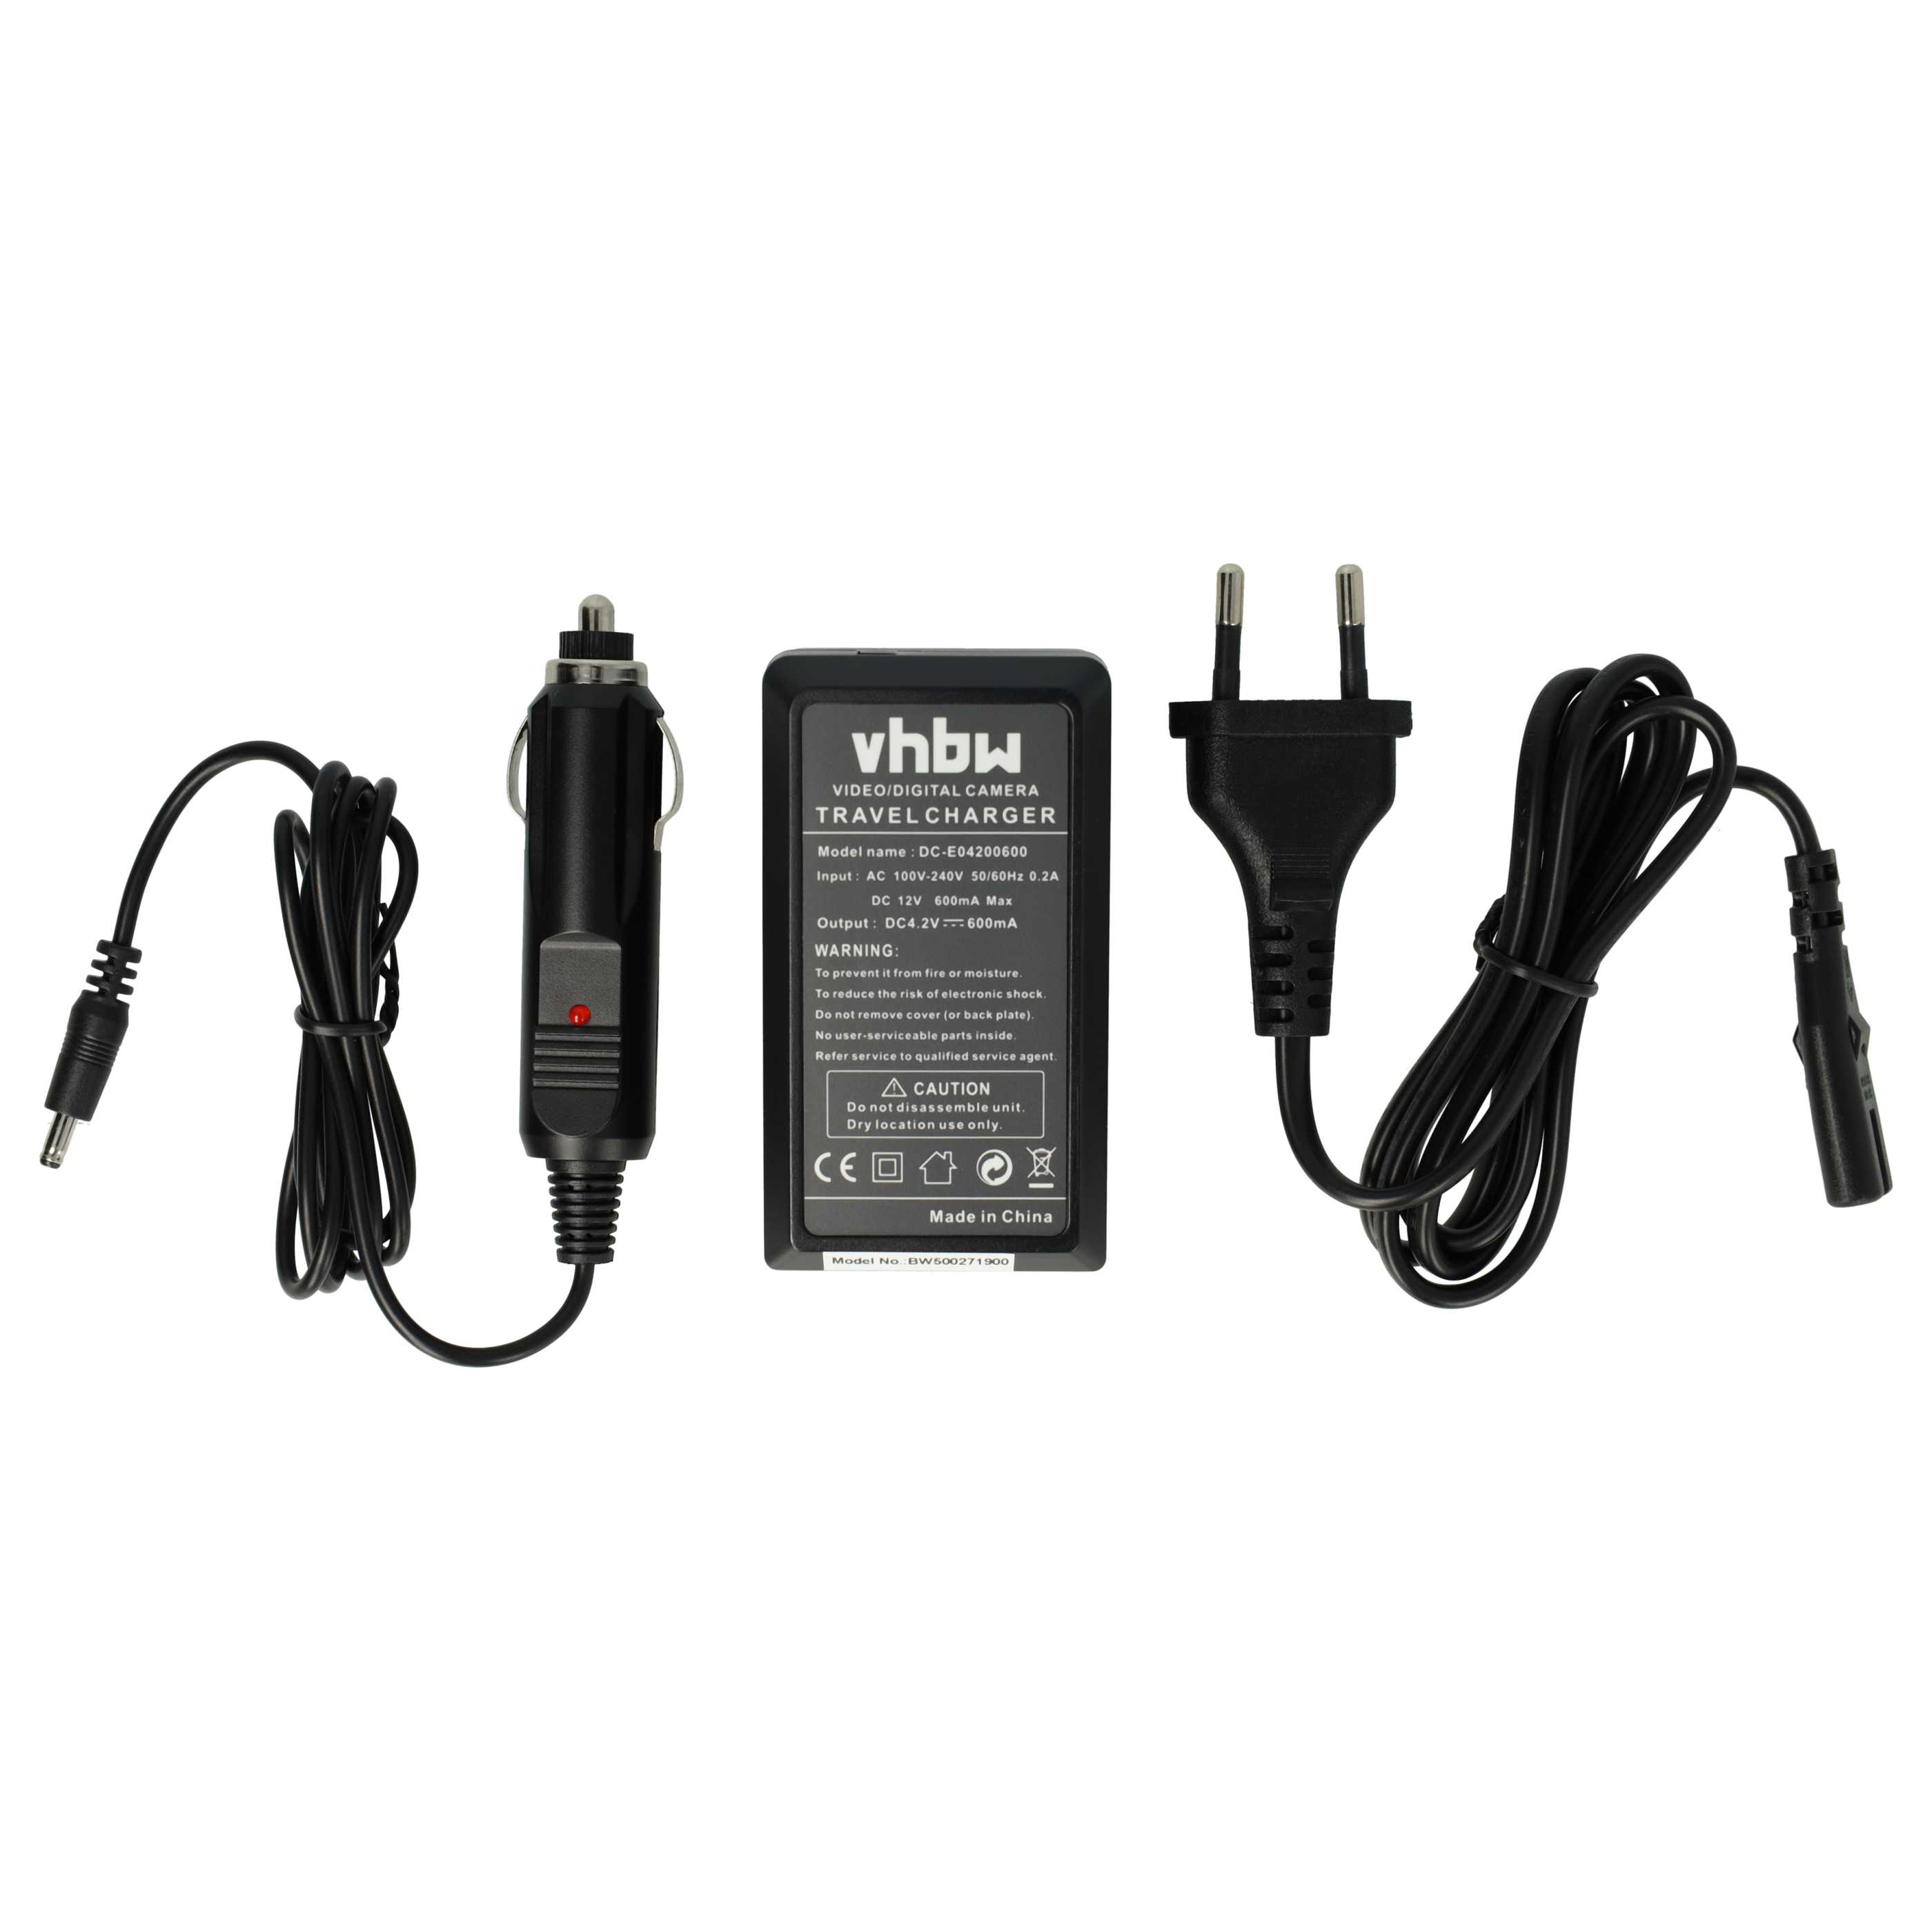 Battery Charger suitable for Sanyo DB-L50 Camera etc. - 0.6 A, 8.4 V